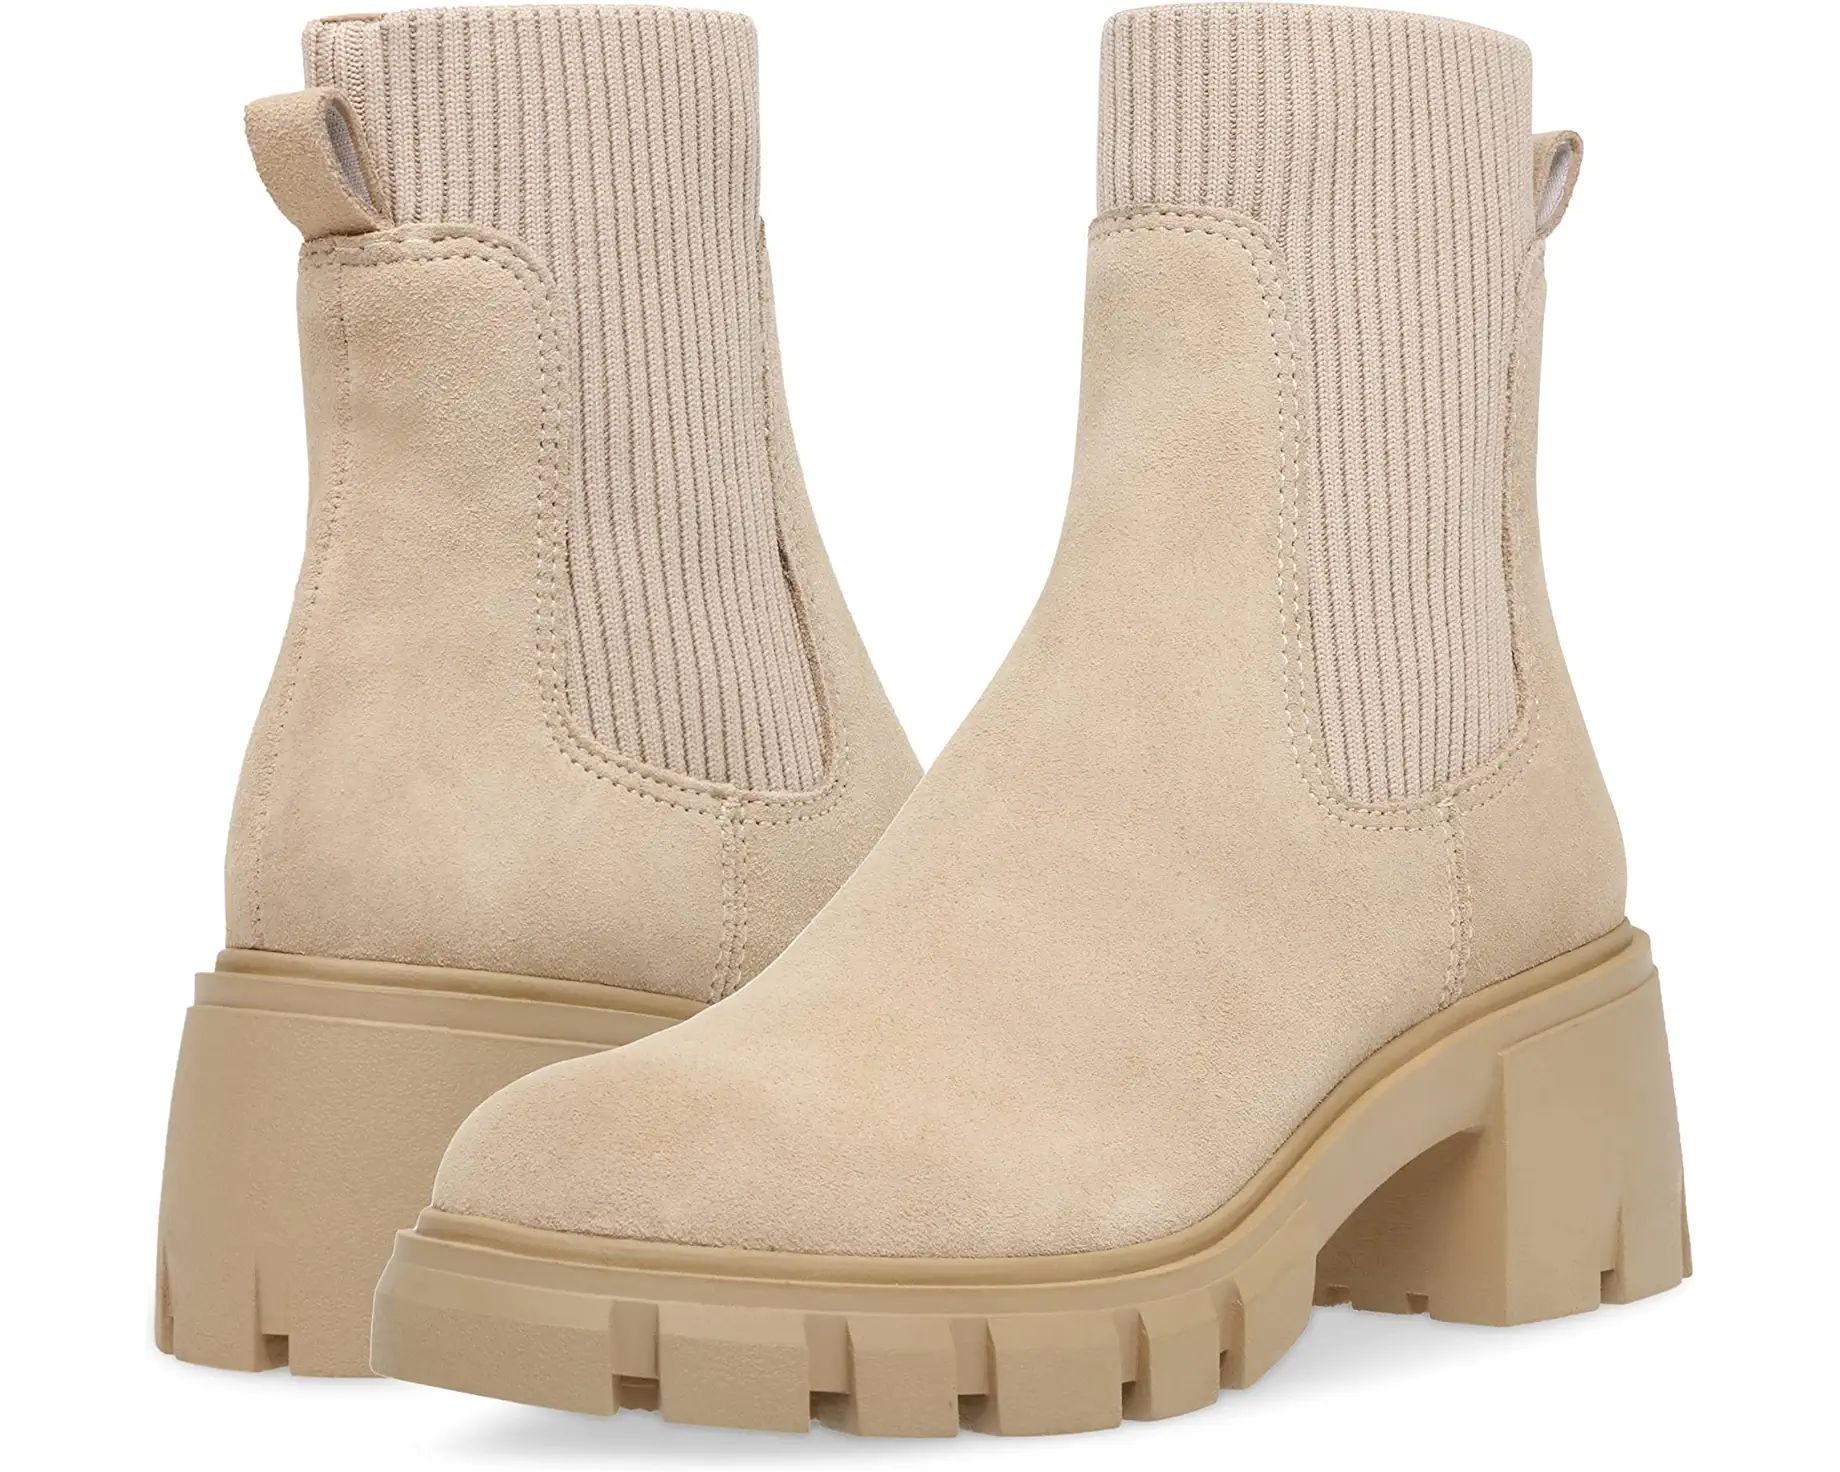 Hayle Boots | Zappos